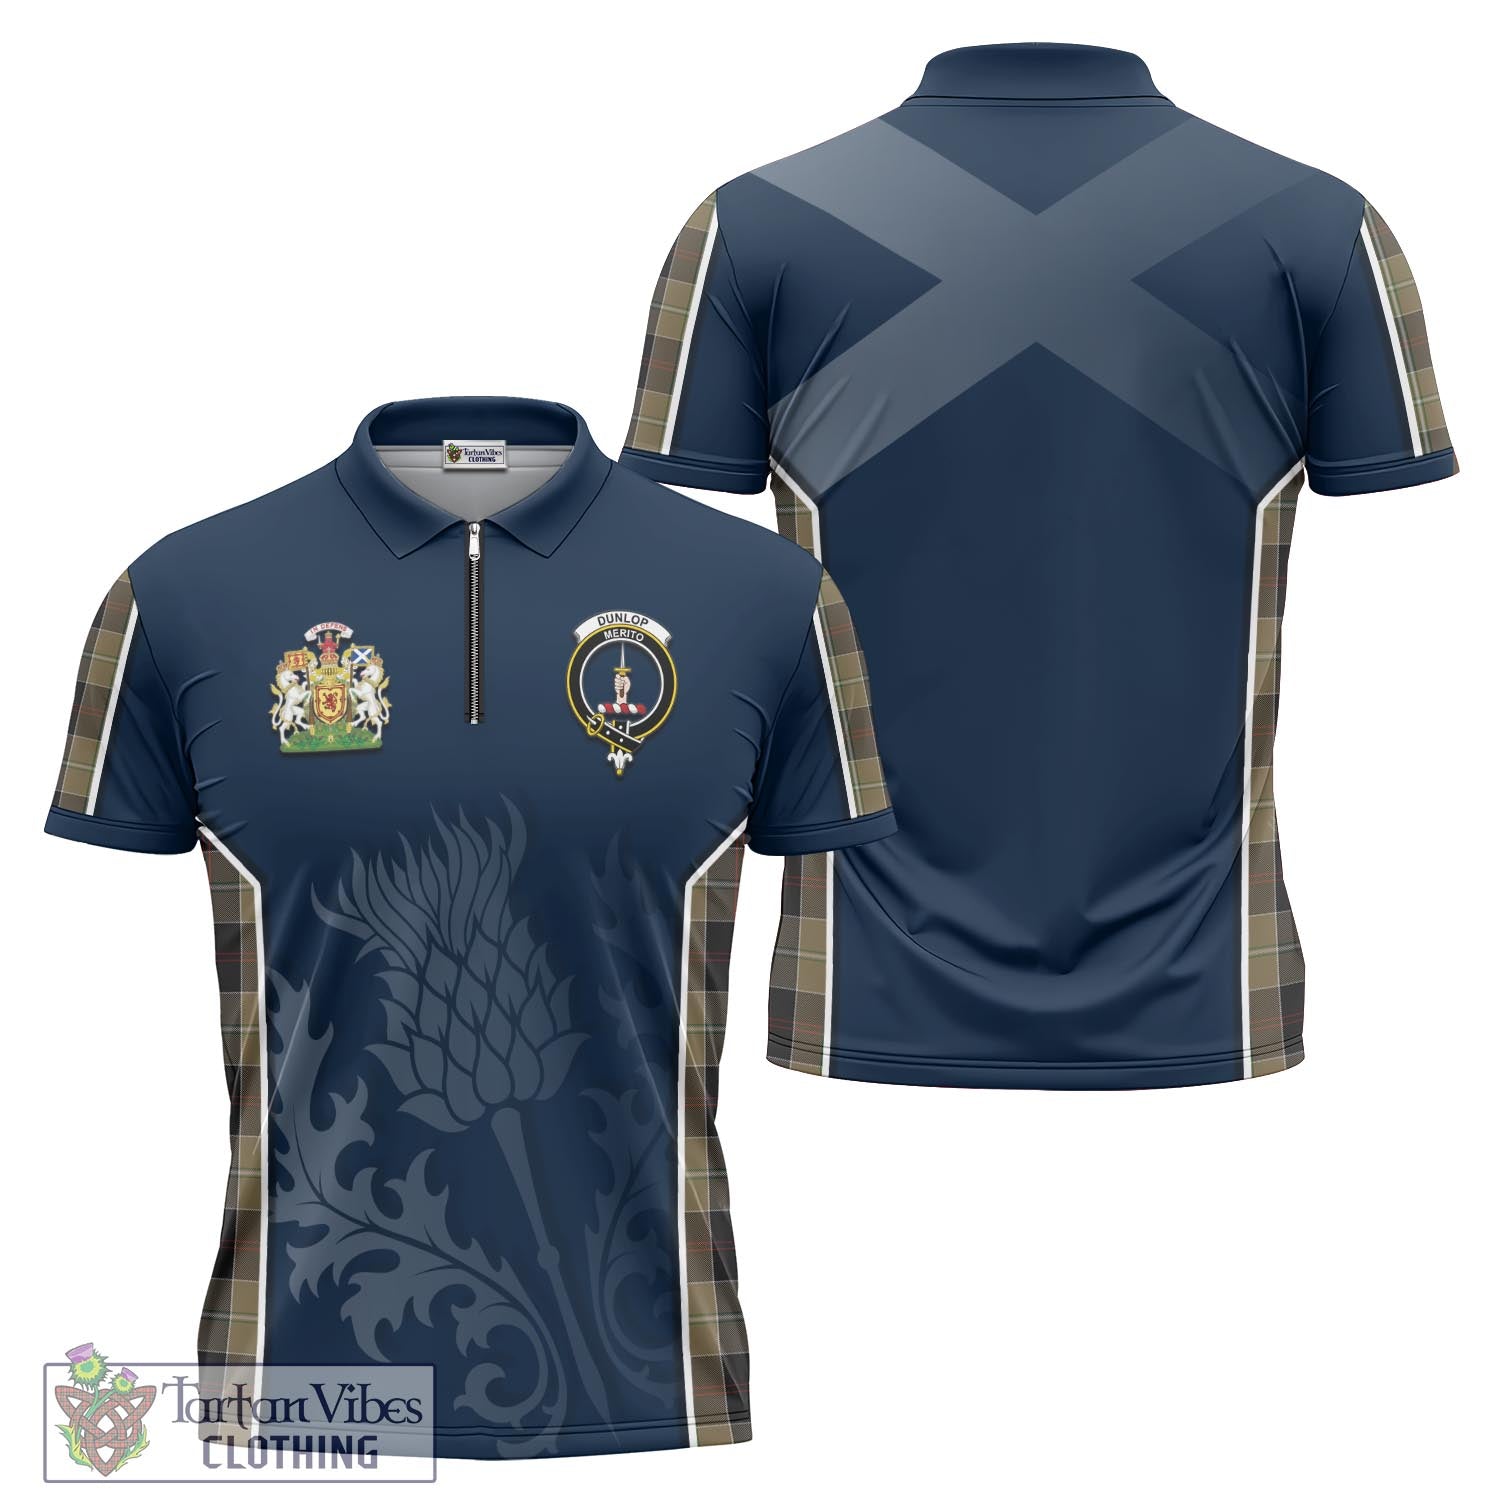 Tartan Vibes Clothing Dunlop Hunting Tartan Zipper Polo Shirt with Family Crest and Scottish Thistle Vibes Sport Style